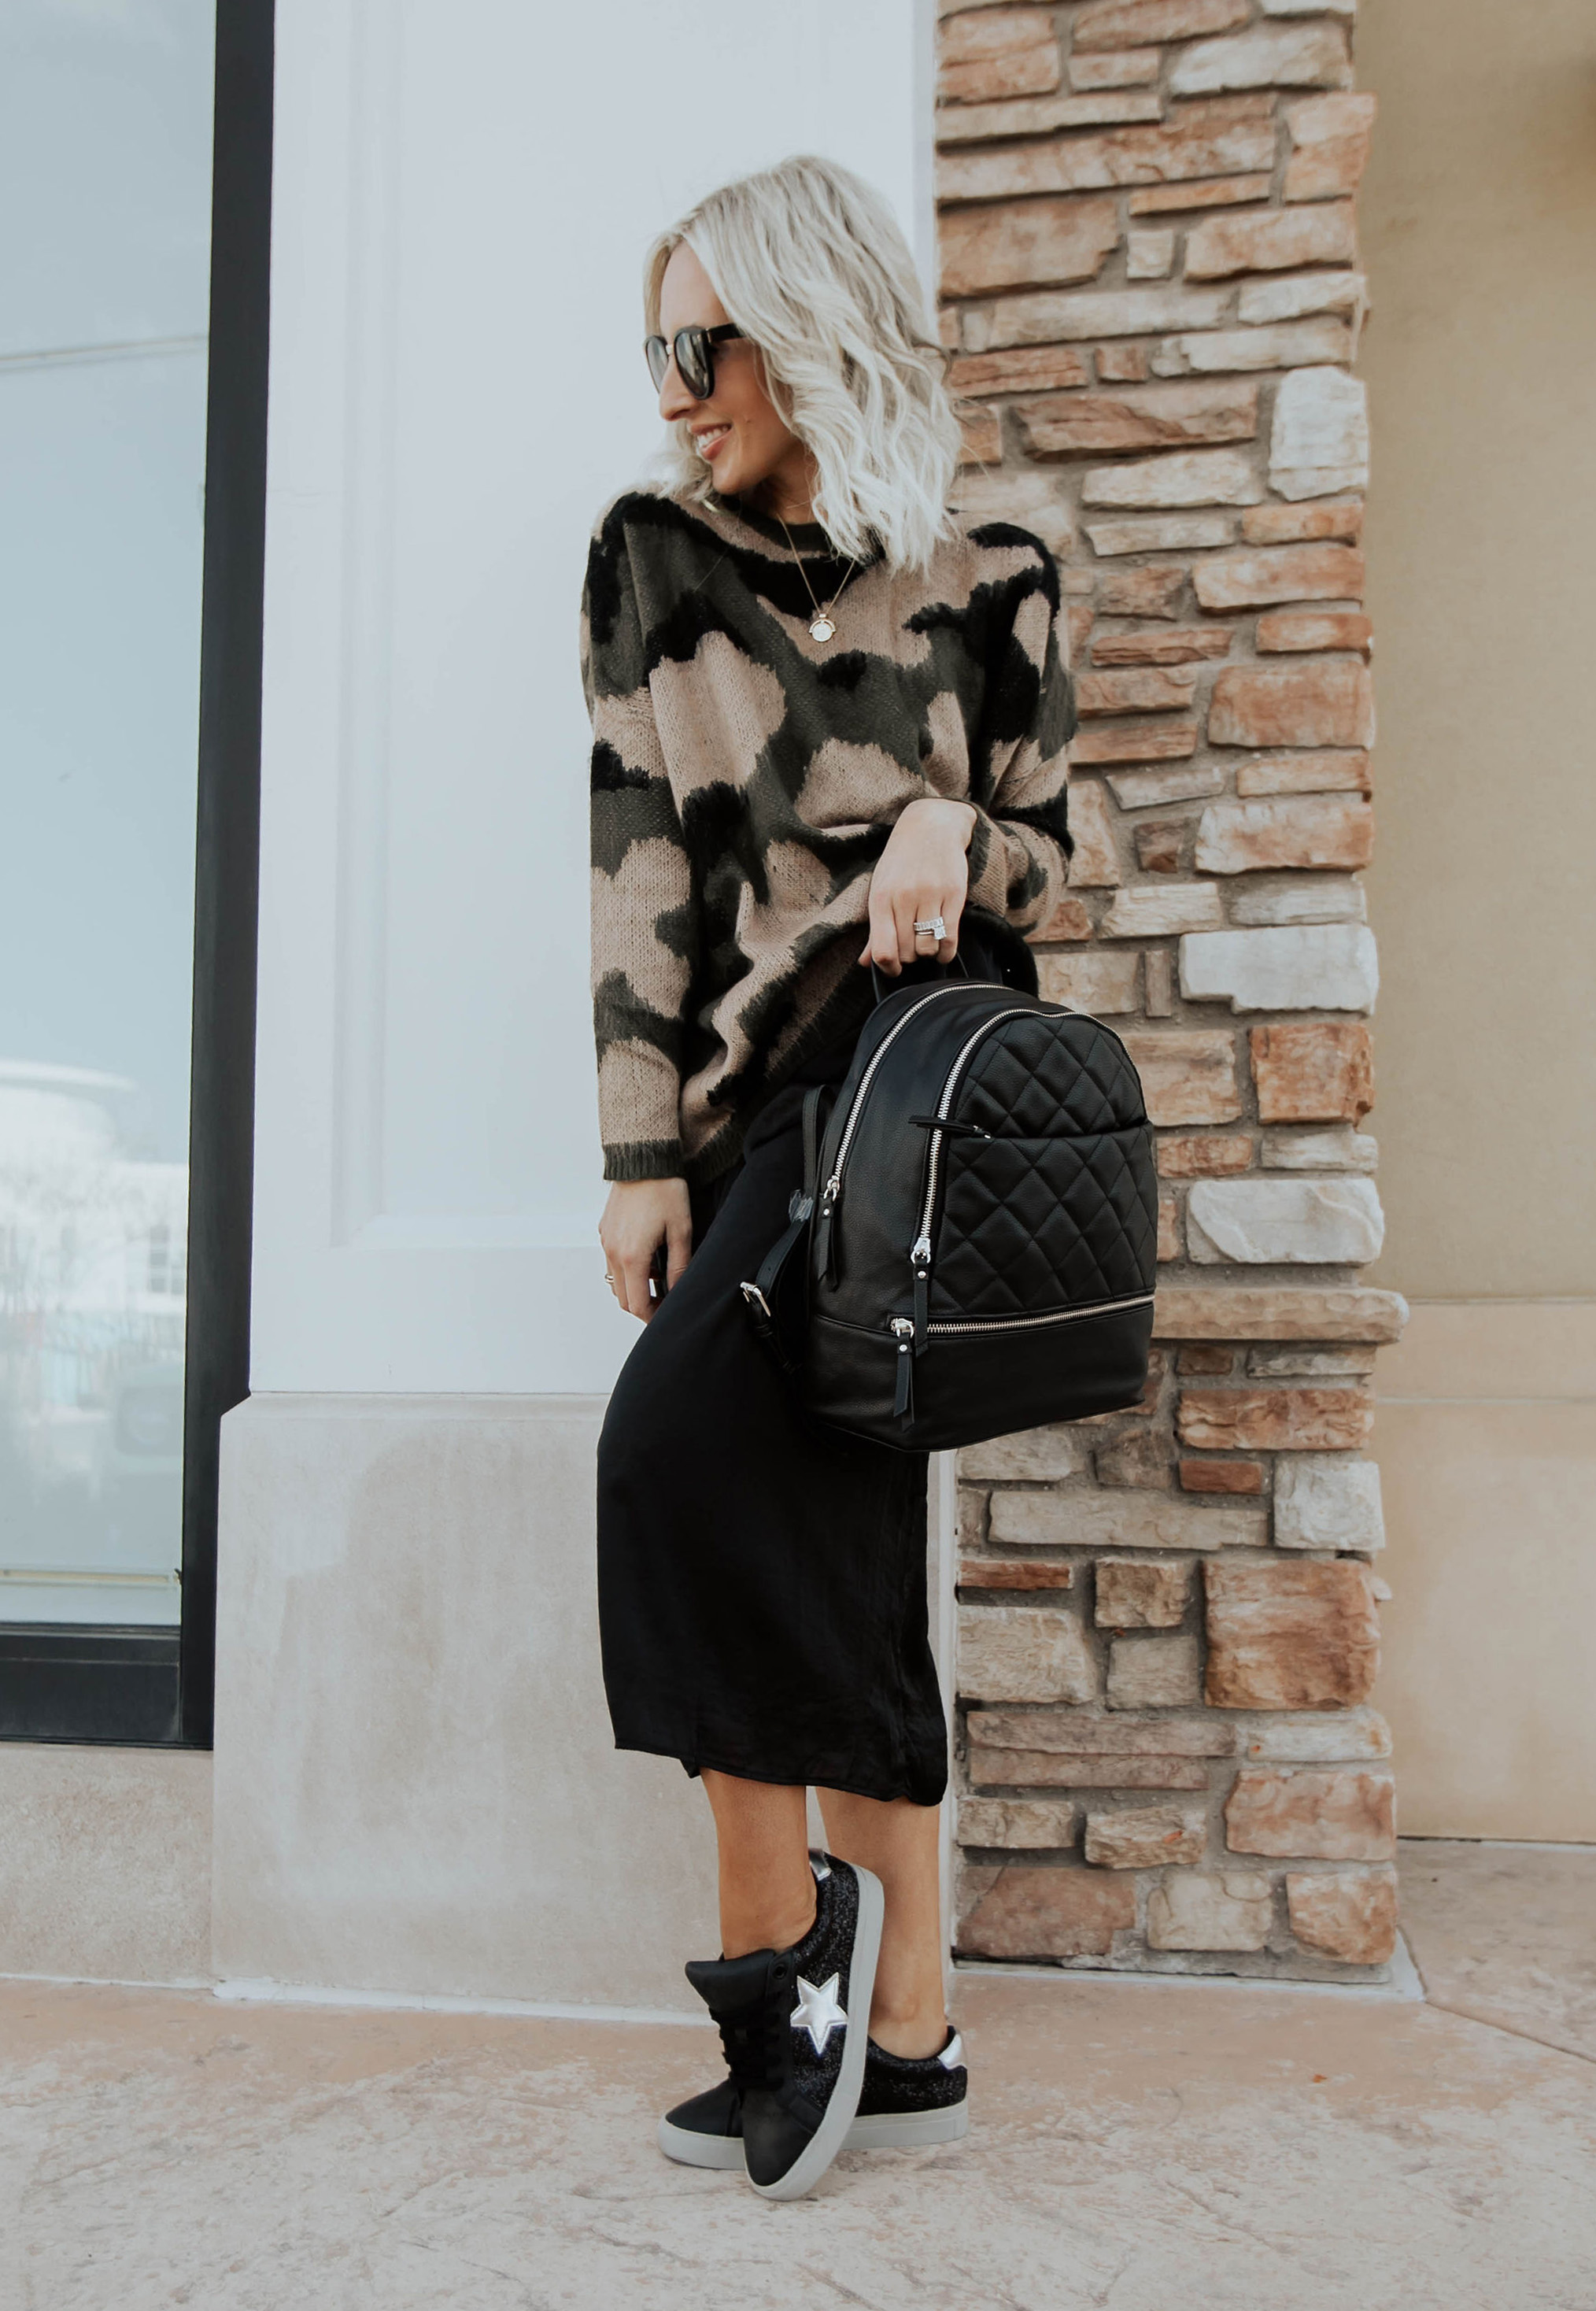 Reno Nevada Blogger, Emily Farren Wieczorek of Two Peas in a Prada shares all of her favorite fall fashion finds in her - Under $30 Fall Staples post with Walmart!